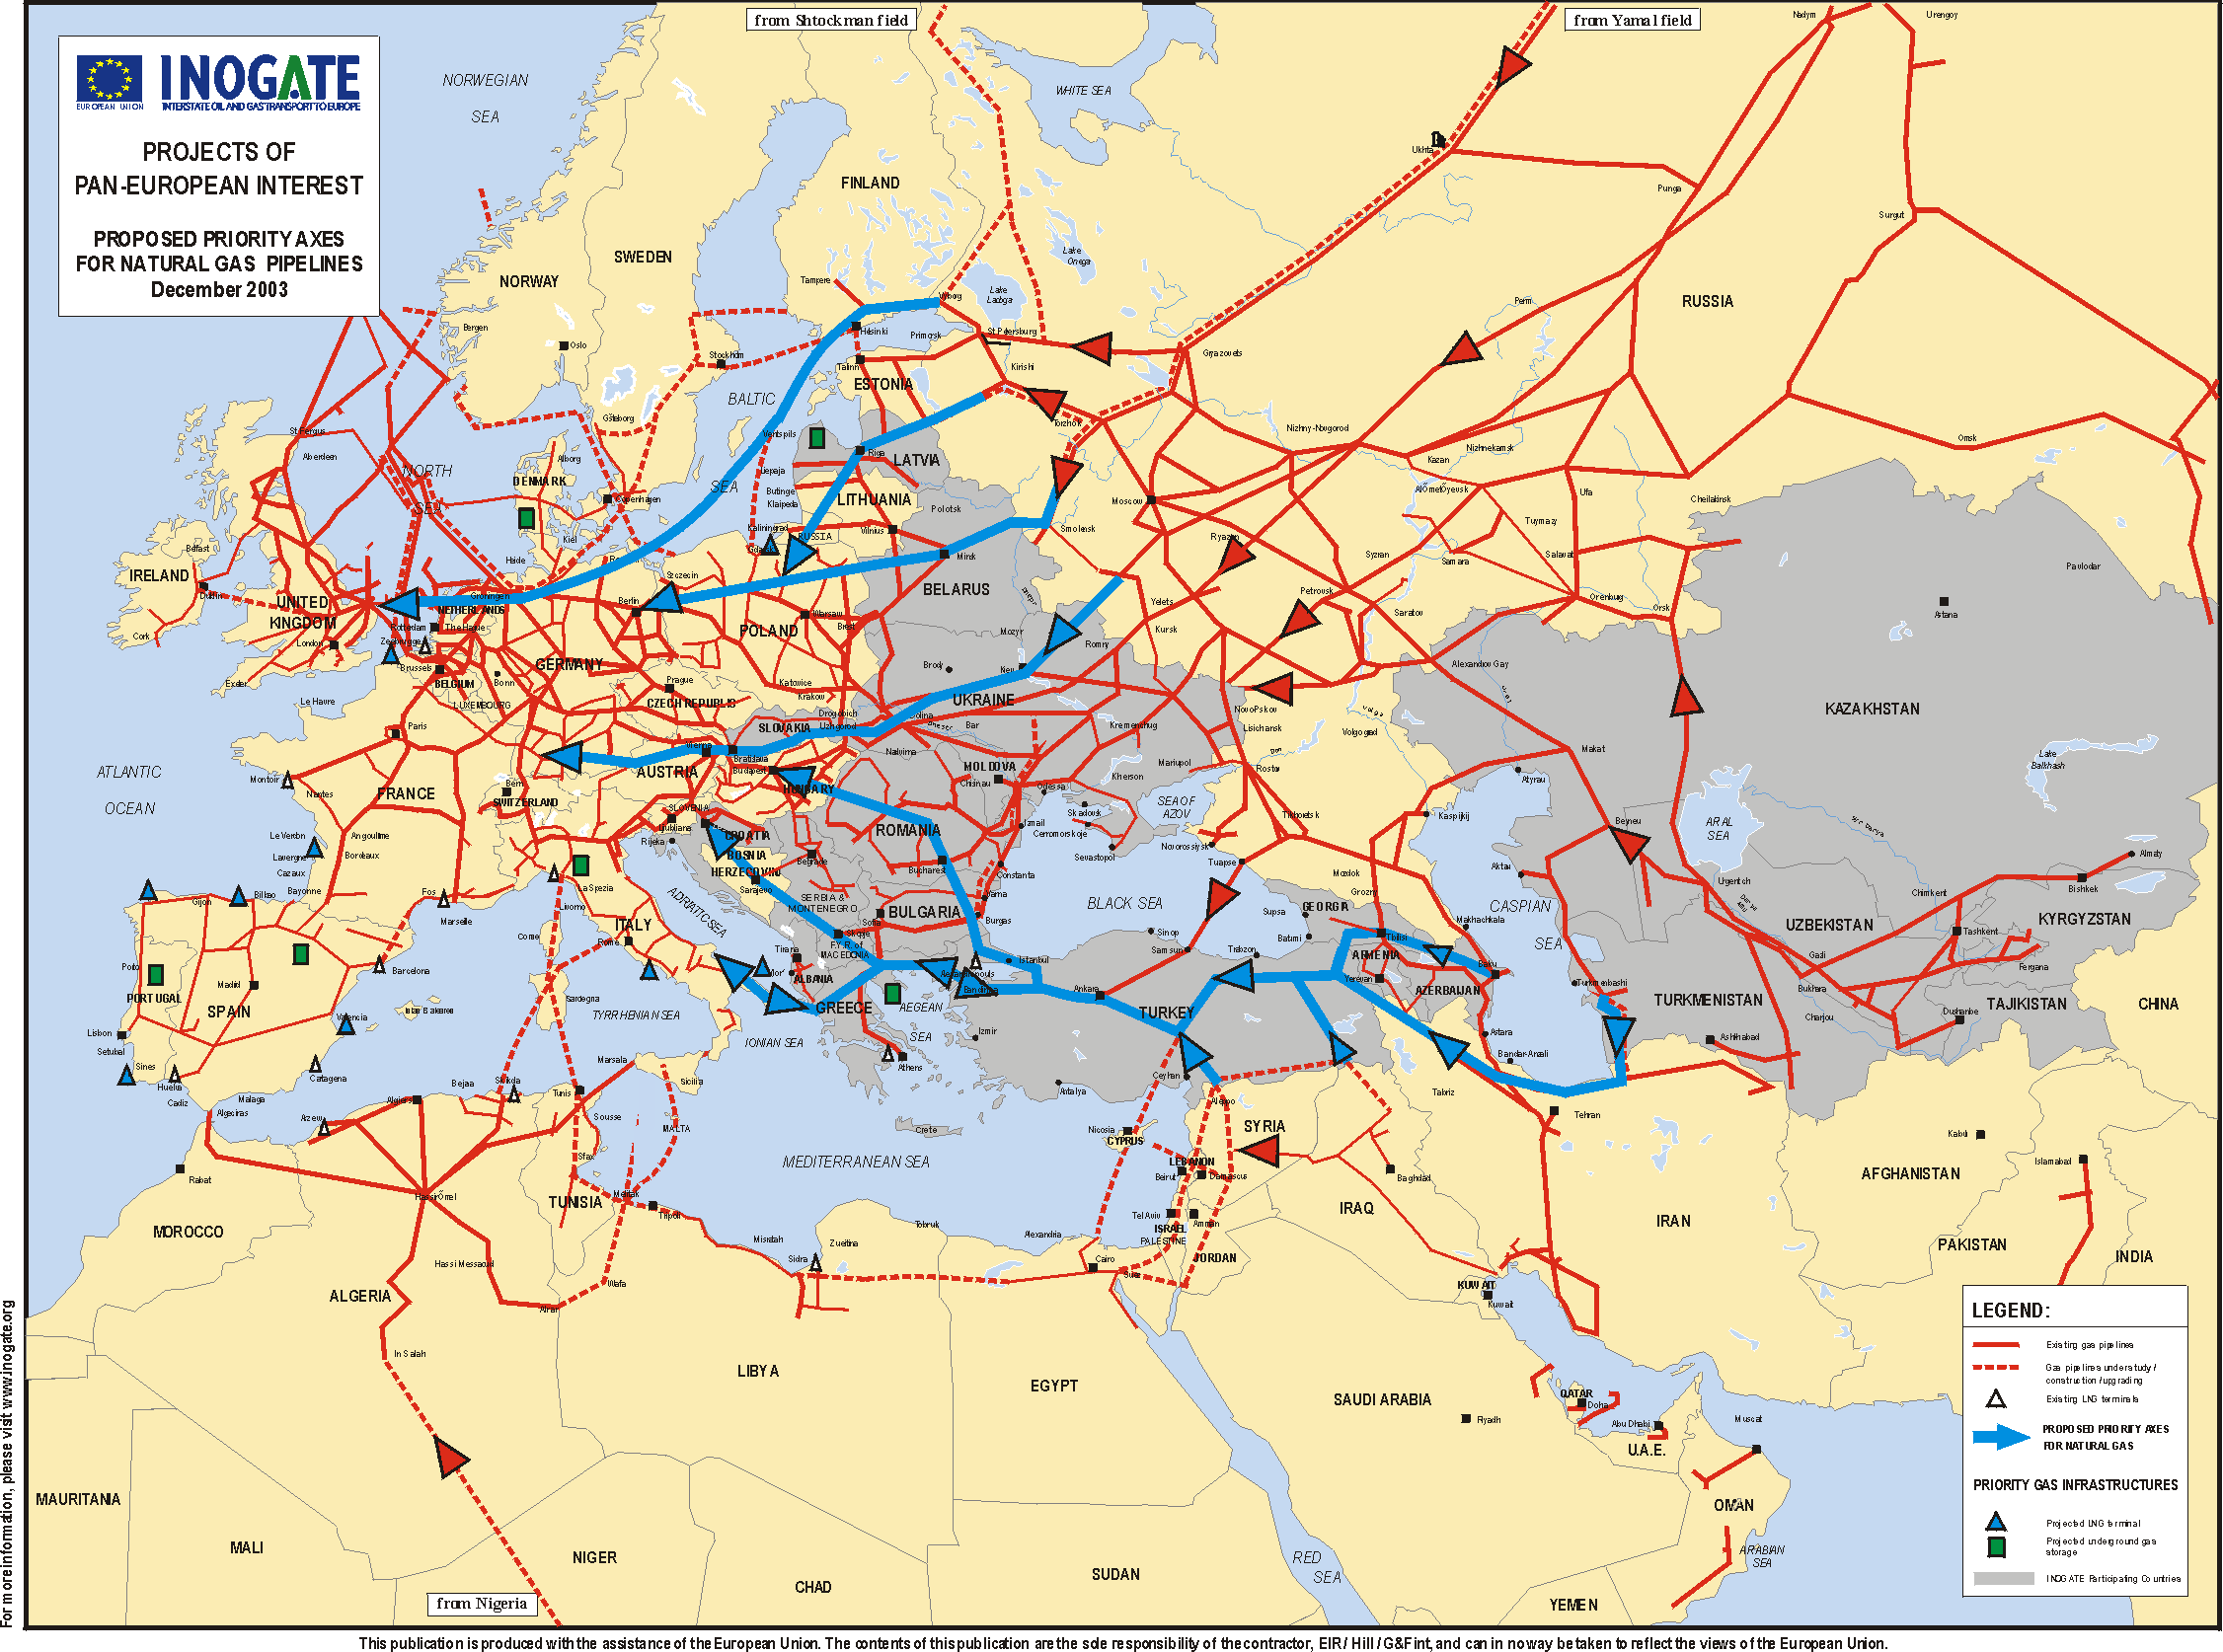 http://www.energyinsights.net/cgi-script/csArticles/uploads/4207/Gas%20Map%20Europe.gif